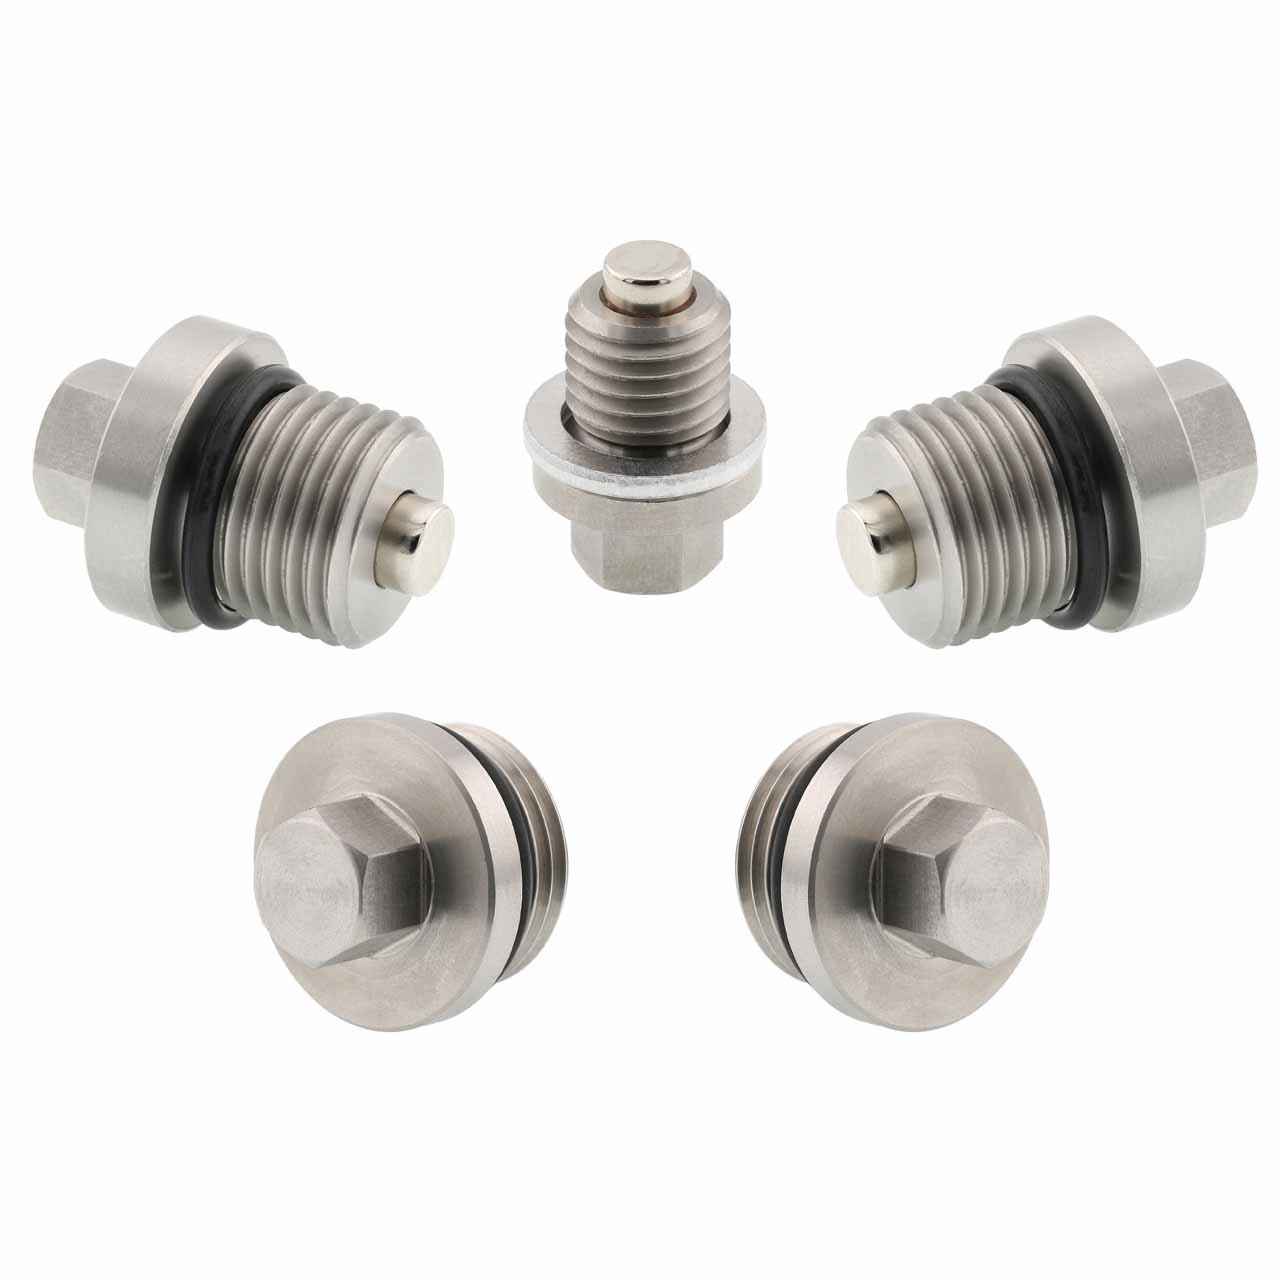 Polaris RZR Trail S 1000 Ultimate Magnetic Oil Drain Plug Kit - 2022-2023 - Engine, Transmission, Differential - Made In USA